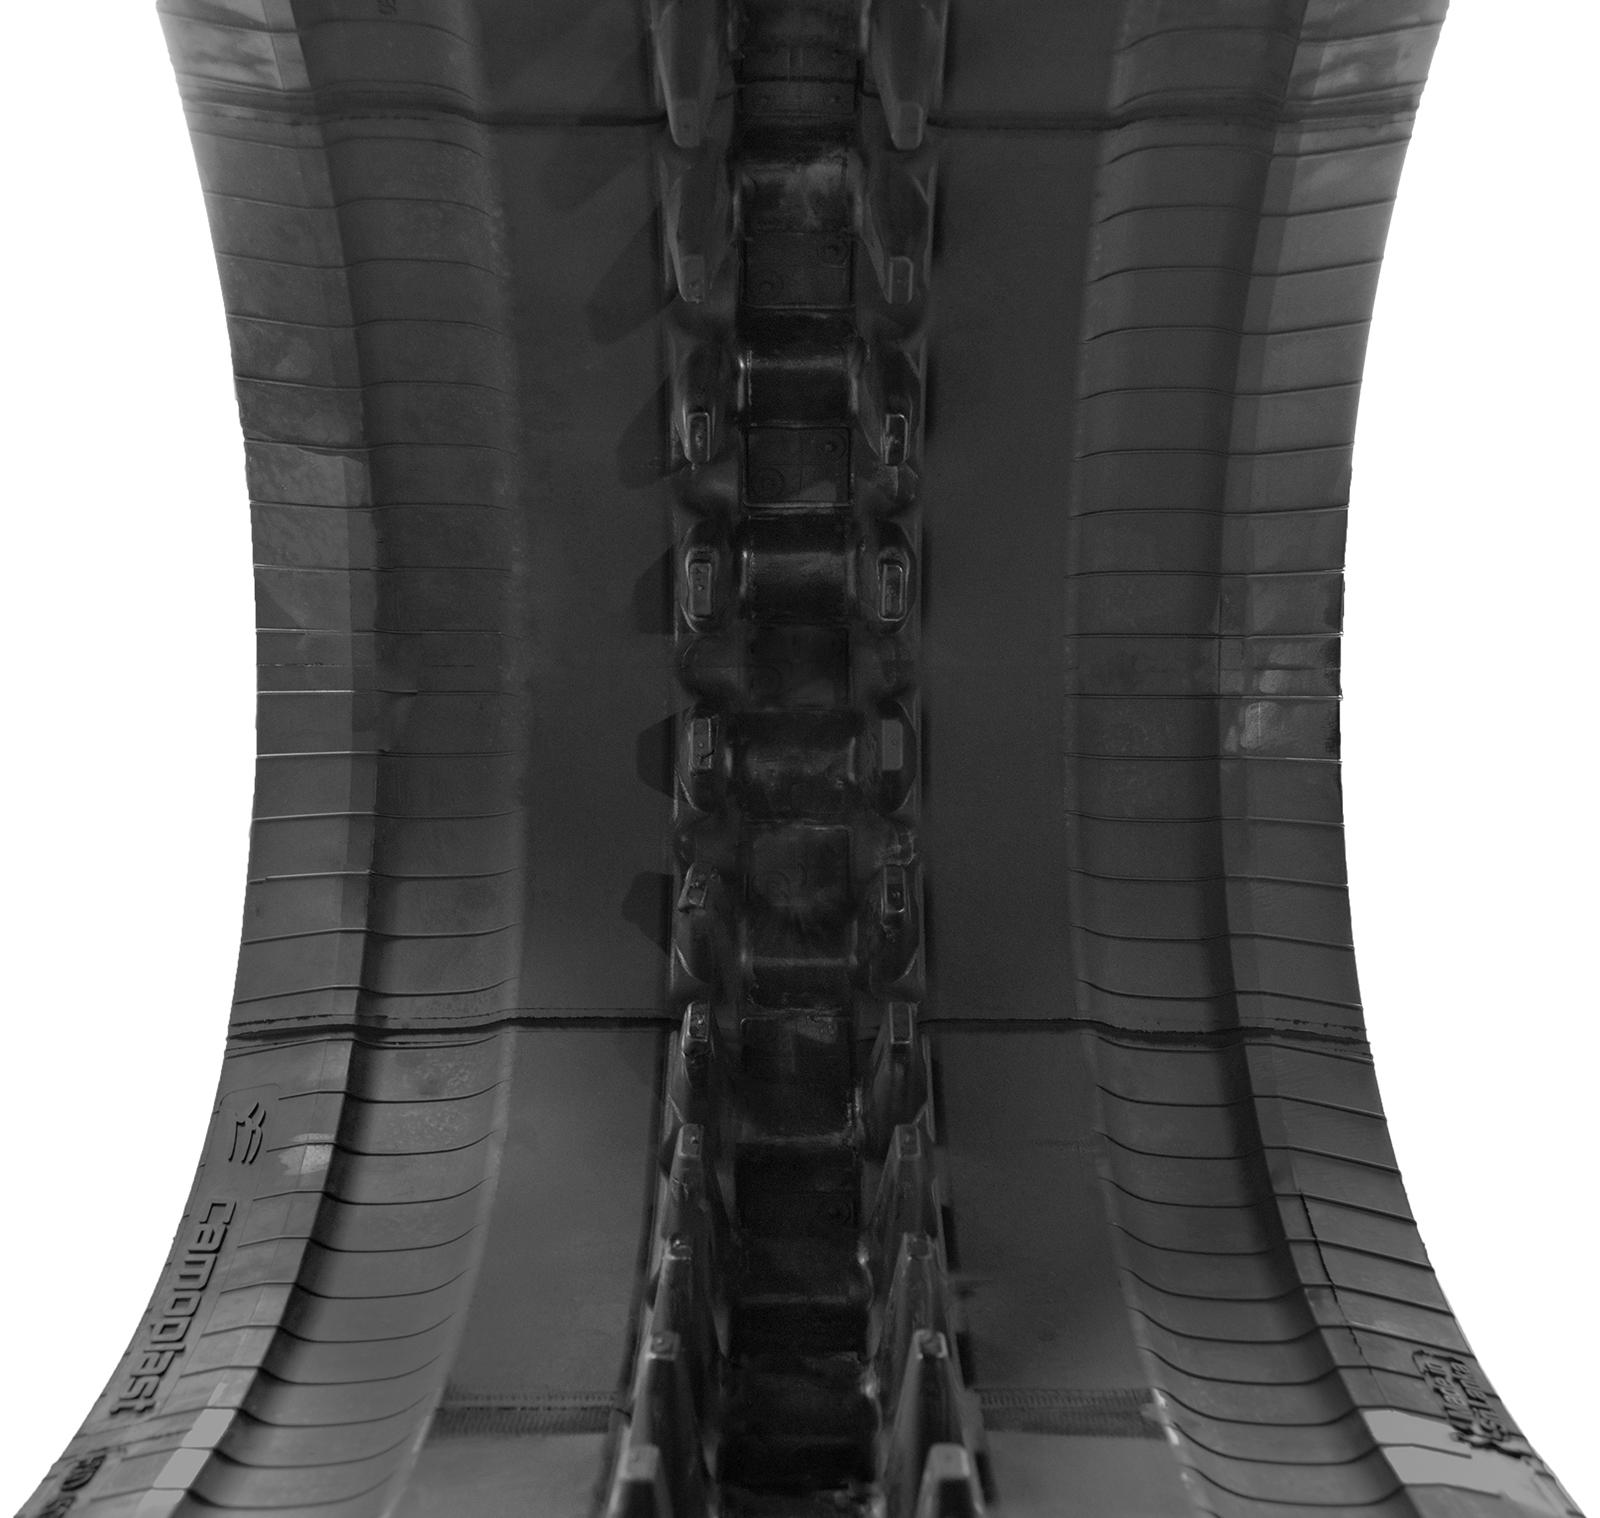 set of 2 13" camso extreme duty hxd pattern rubber tracks (320x86bx52)